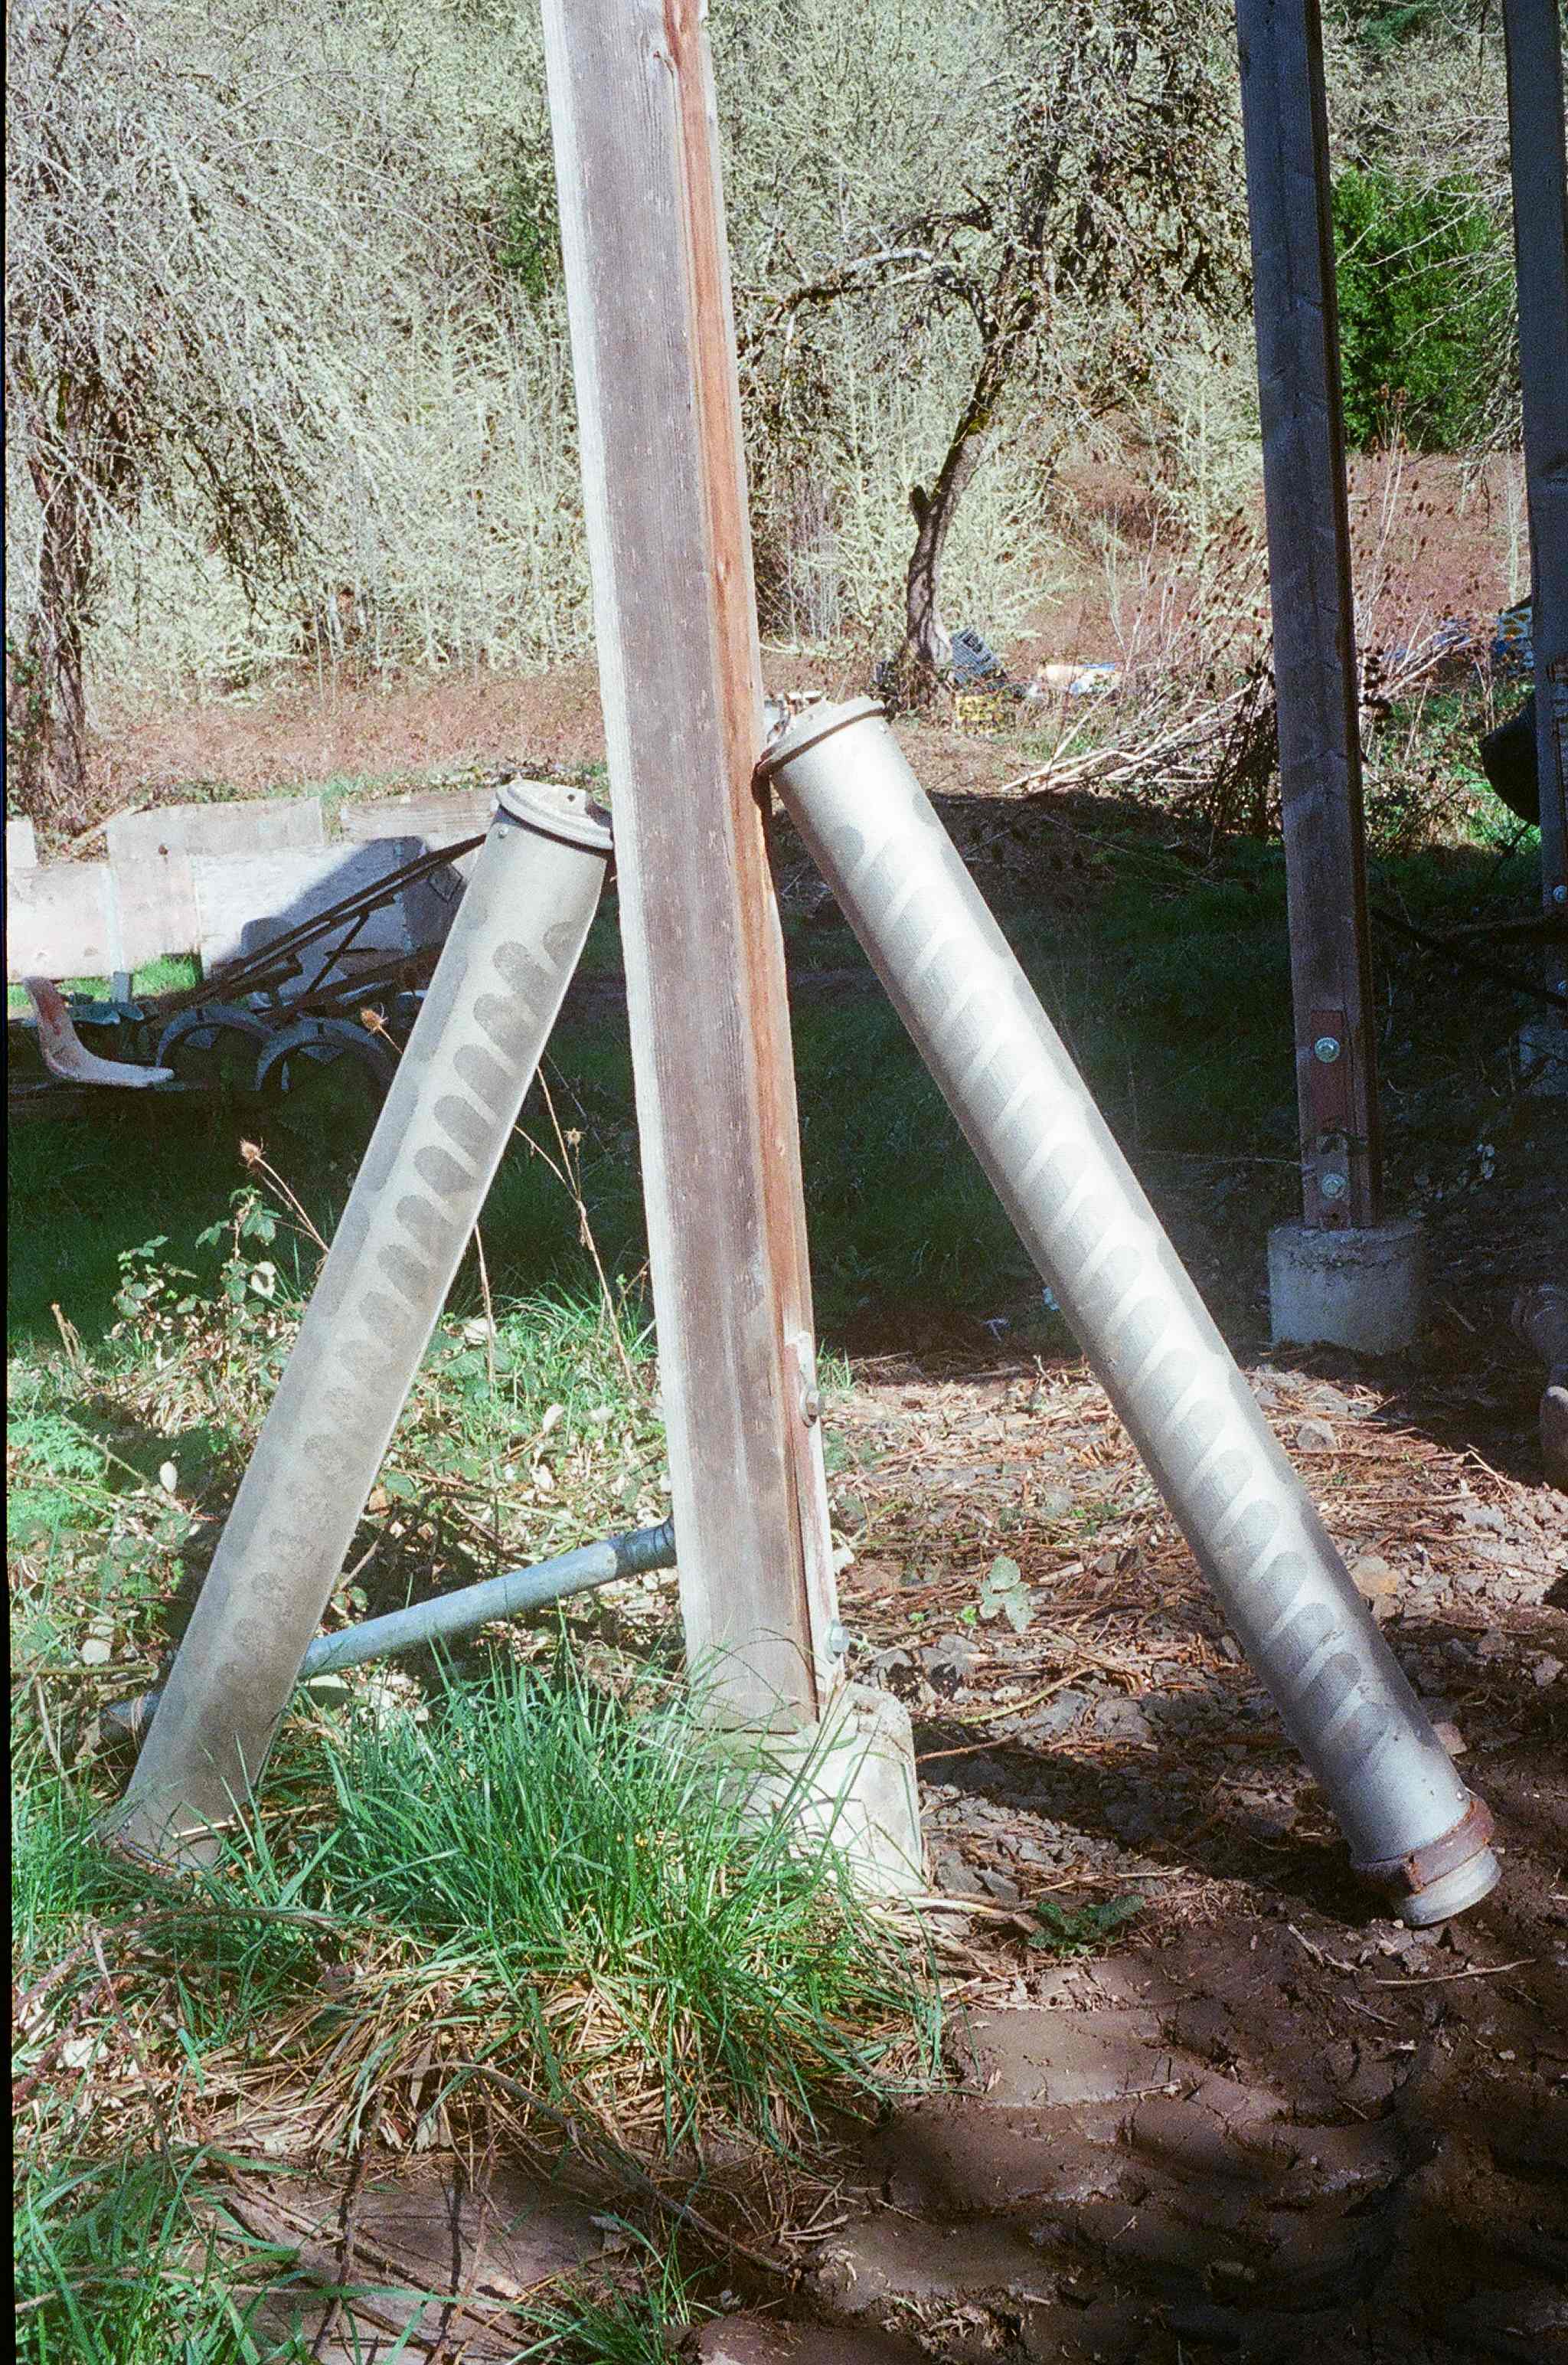  The two cylinders leaning against the post are fish screens that we use on our irrigation pump intake to keep fish of all sizes from getting sucked into the irrigation system. 